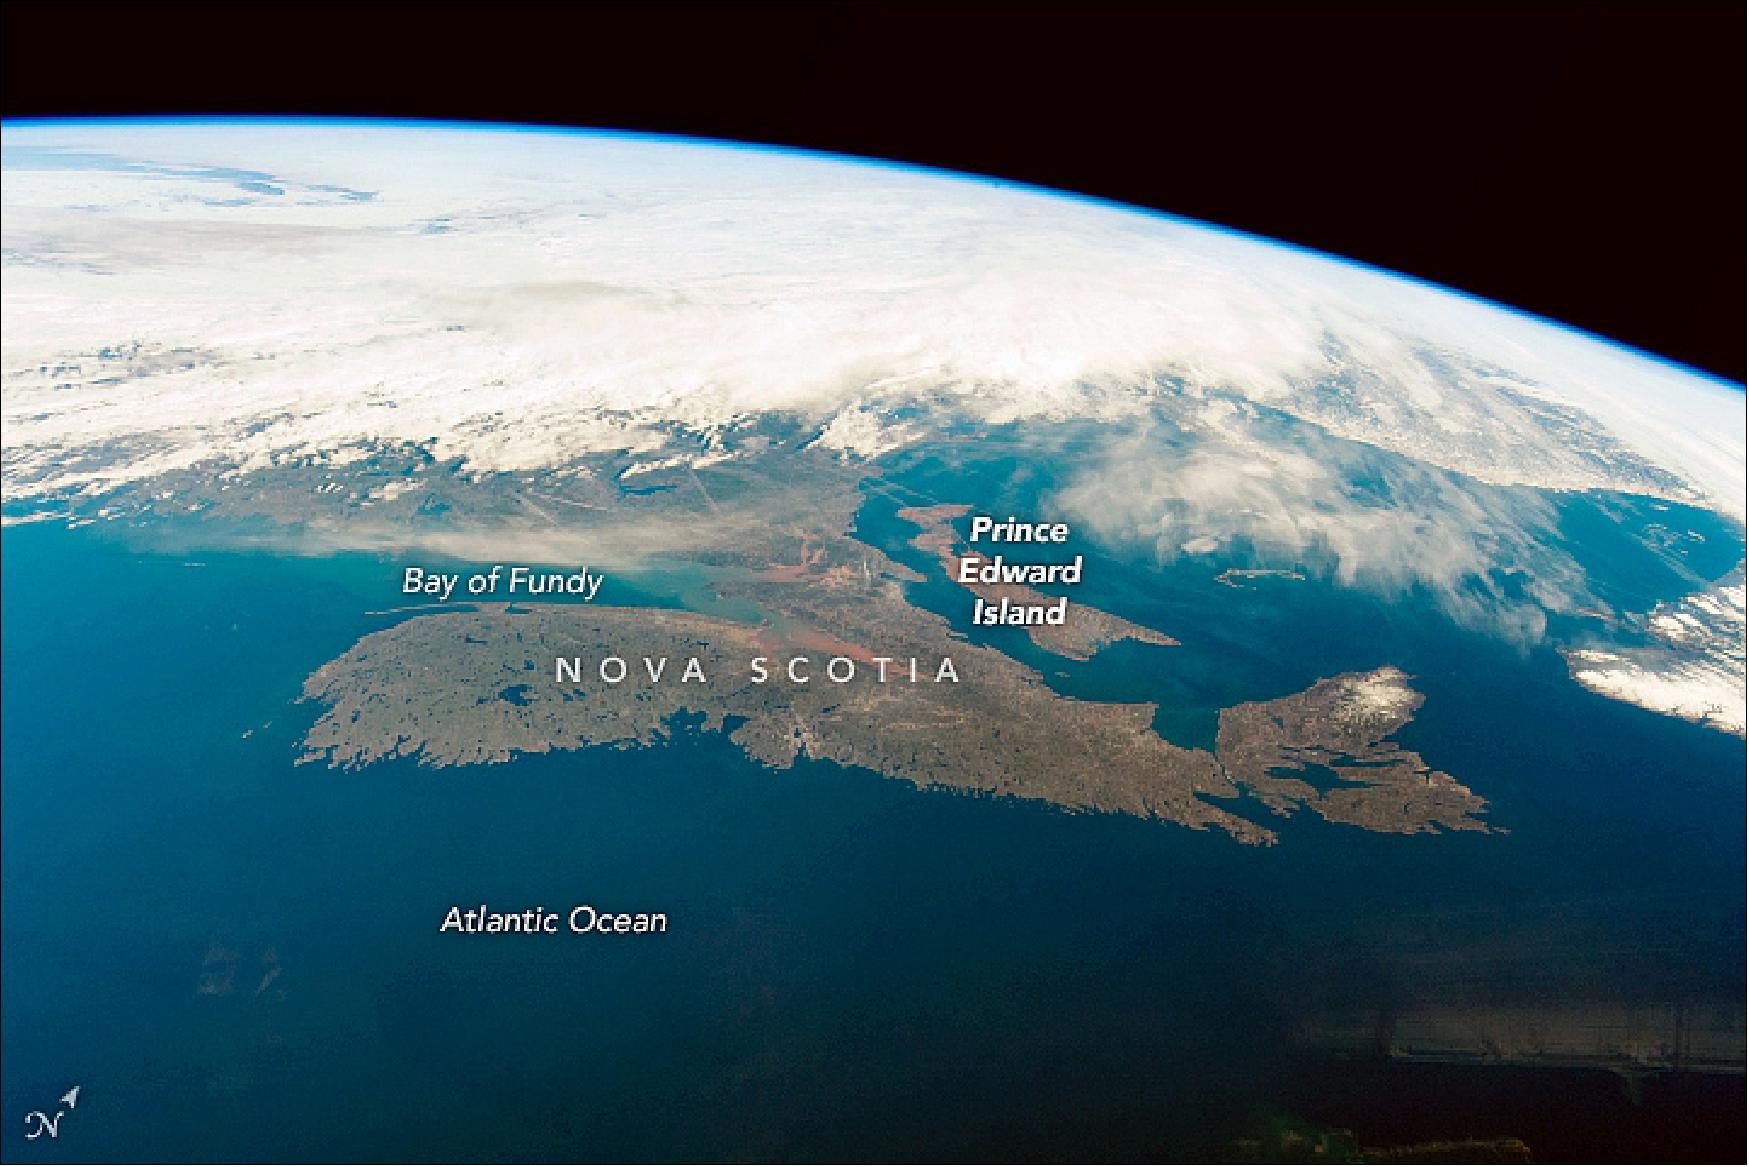 Figure 72: Taken 2 minutes and 18 seconds later, the second view is not only reversed—north to the right instead of the left and the Atlantic in the foreground—but the Sun is behind the camera and there is more color contrast. Land surfaces are brighter than the sea surface, which appears in a generally uniform color. The rounded southern end of Nova Scotia is prominent, having been almost lost to view in the first image. Coastline detail is much reduced. The warm tone of sediment at the head of the Bay of Fundy has become visible, and a hint of snow is visible at the northern end of the peninsula (image credit: Astronaut photographs ISS059-E-59135 and ISS059-E-52689 were acquired on 7 May 2019, with a Nikon D5 digital camera using 50 mm and 35 mm lenses (respectively) and are provided by the ISS Crew Earth Observations Facility and the Earth Science and Remote Sensing Unit, Johnson Space Center. The images were taken by a member of the Expedition 59 crew. Caption by M. Justin Wilkinson and Susan Runco)